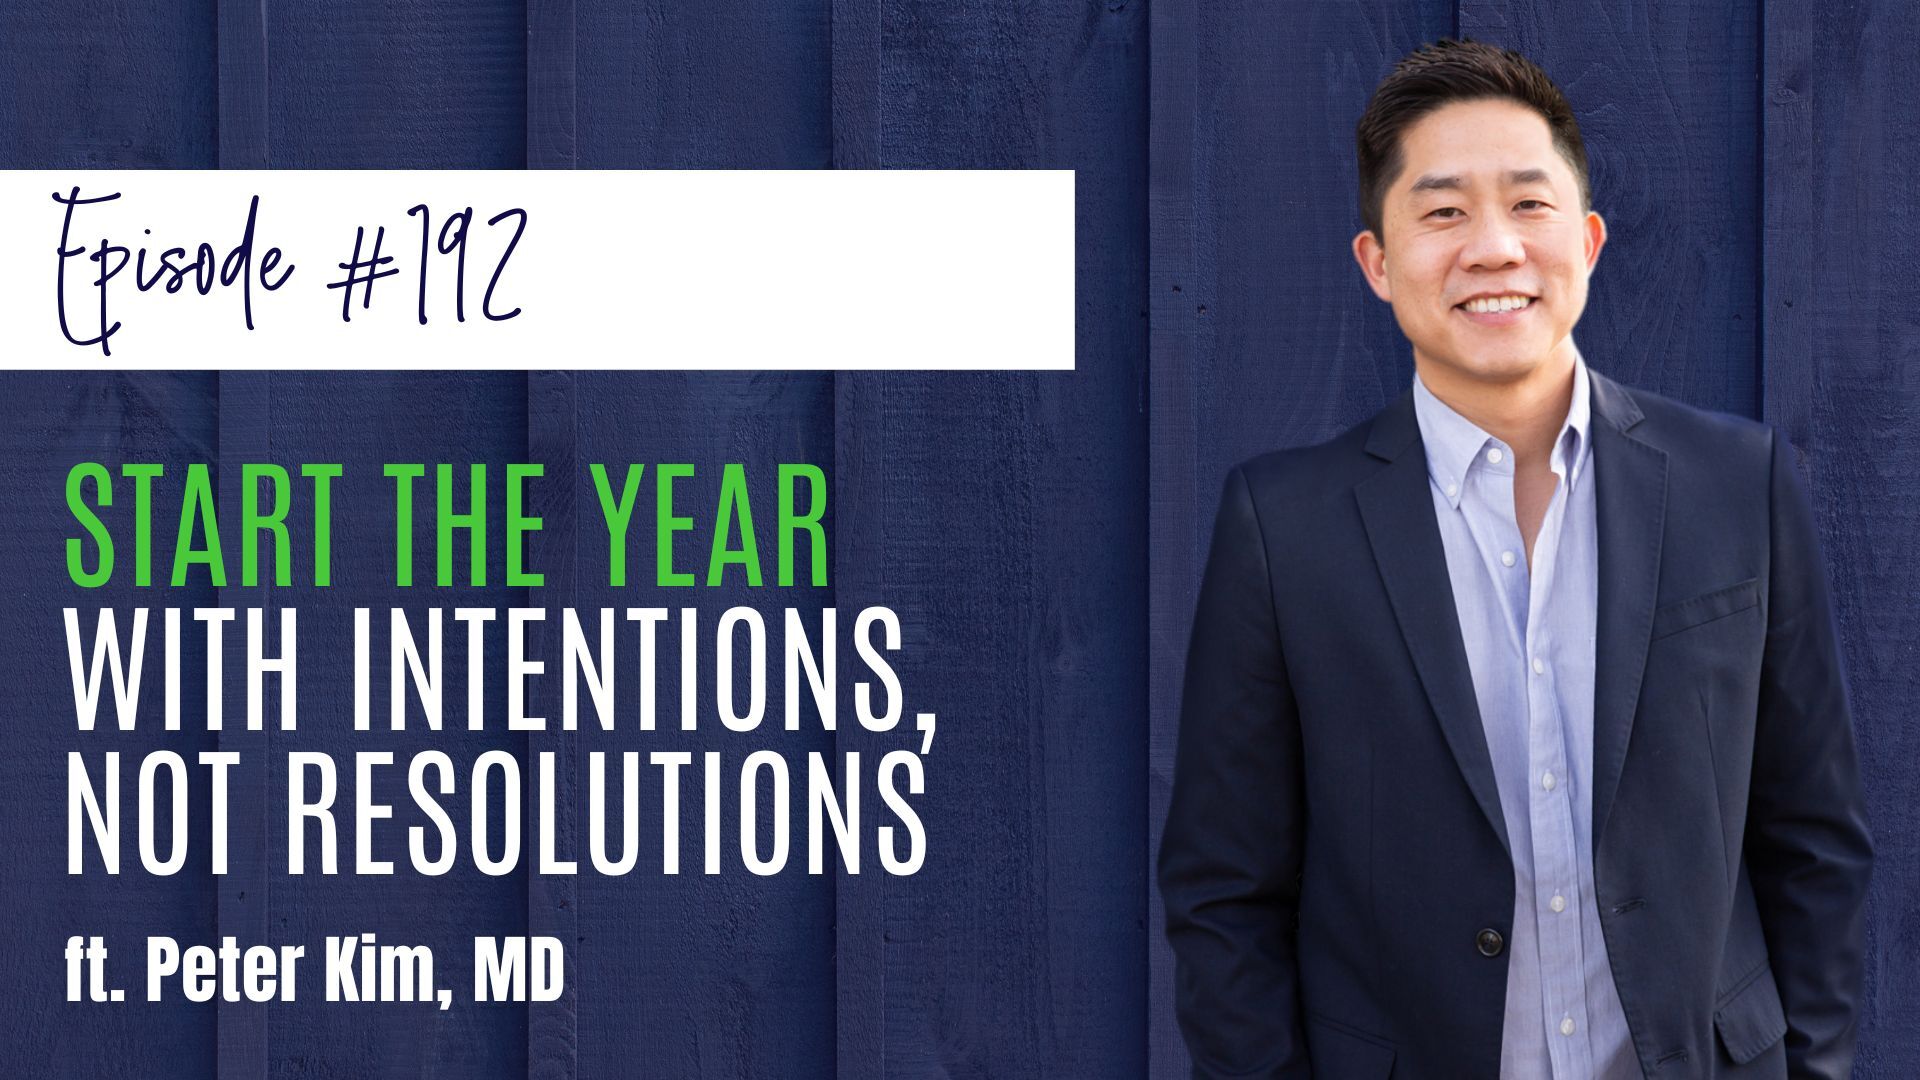 #192 Start the Year with Intentions, not Resolutions ft. Peter Kim, M.D